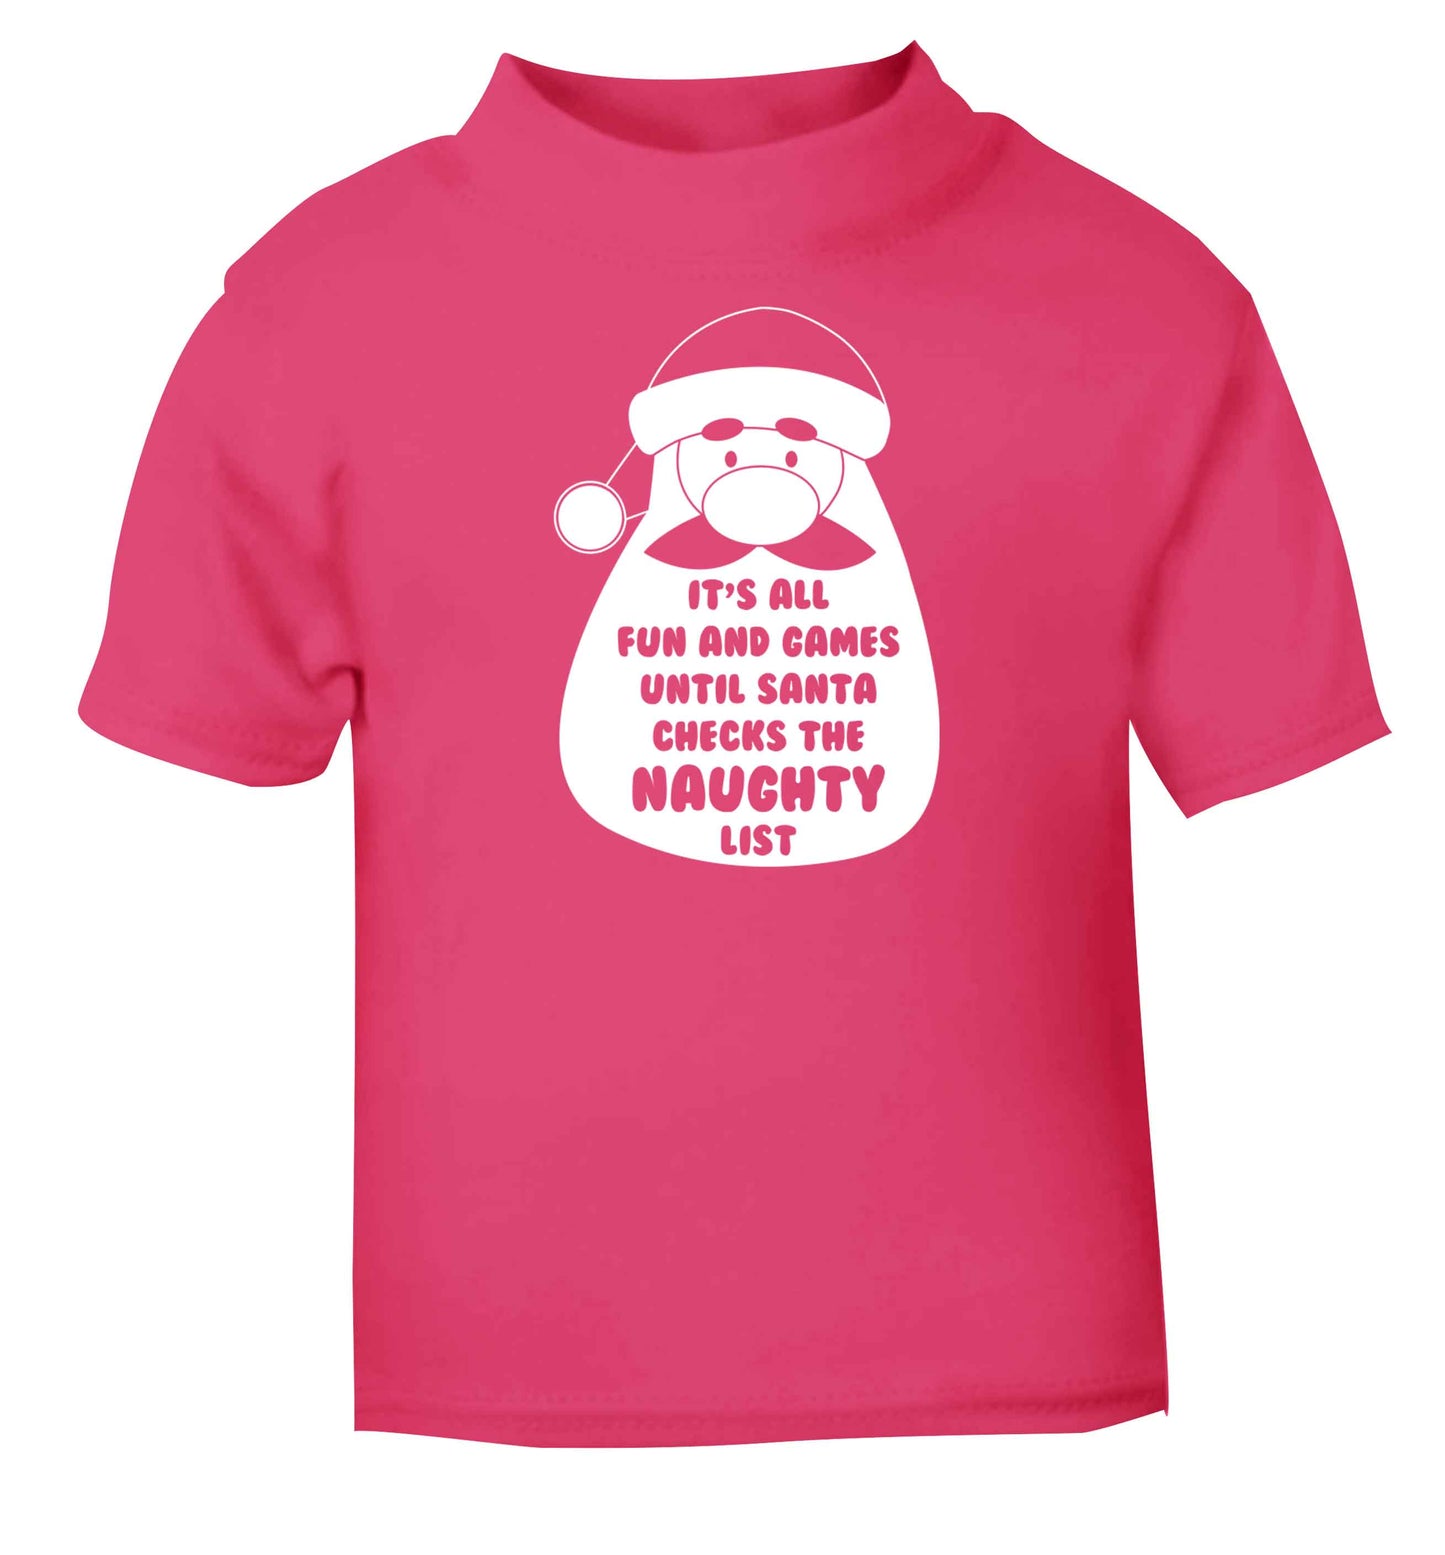 It's all fun and games until Santa checks the naughty list pink baby toddler Tshirt 2 Years